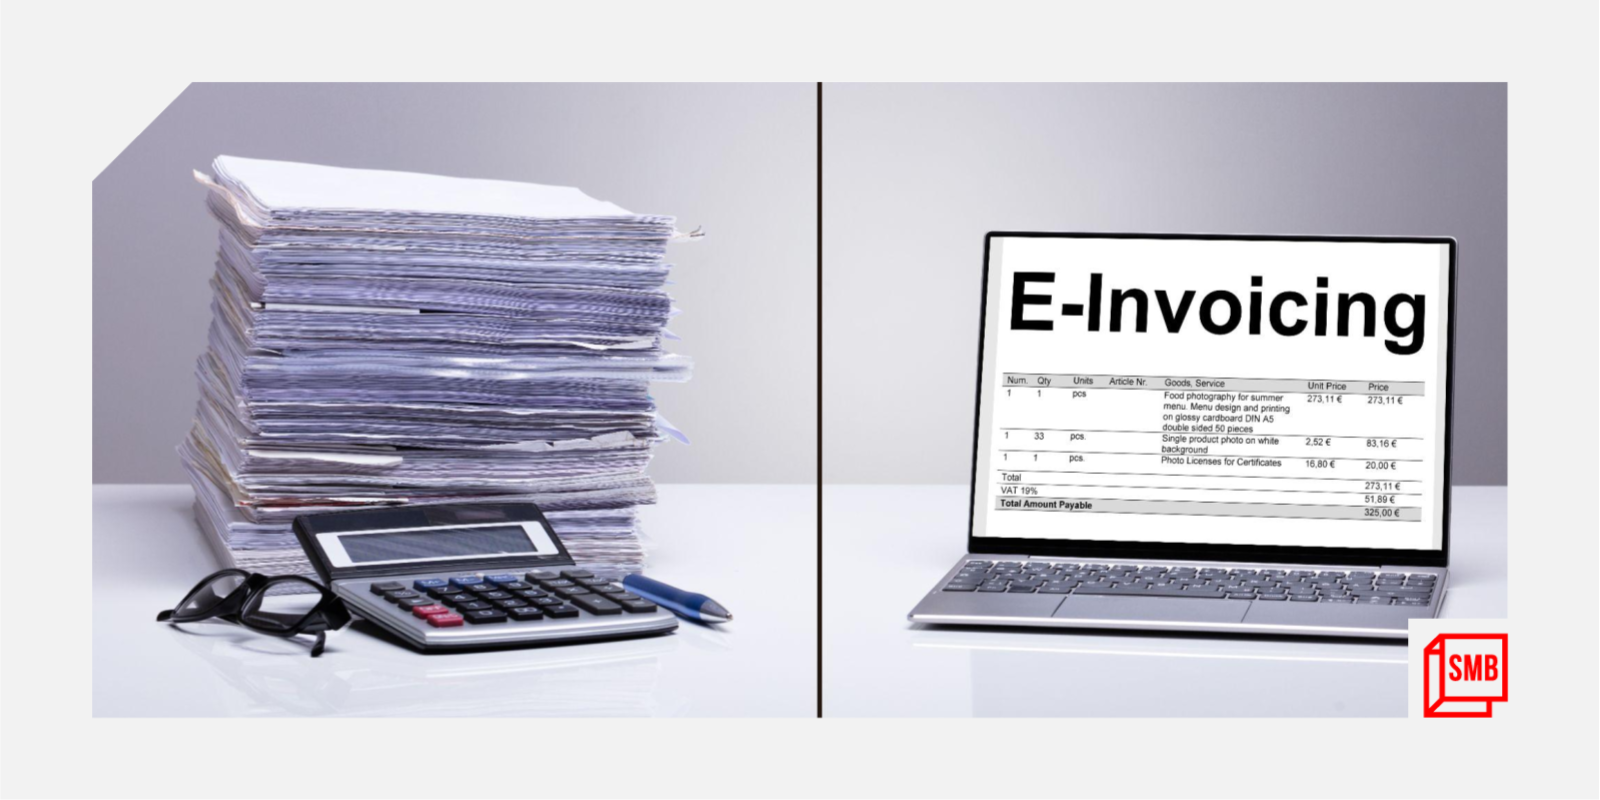 How is e-invoicing simplifying compliances for small businesses in India?

